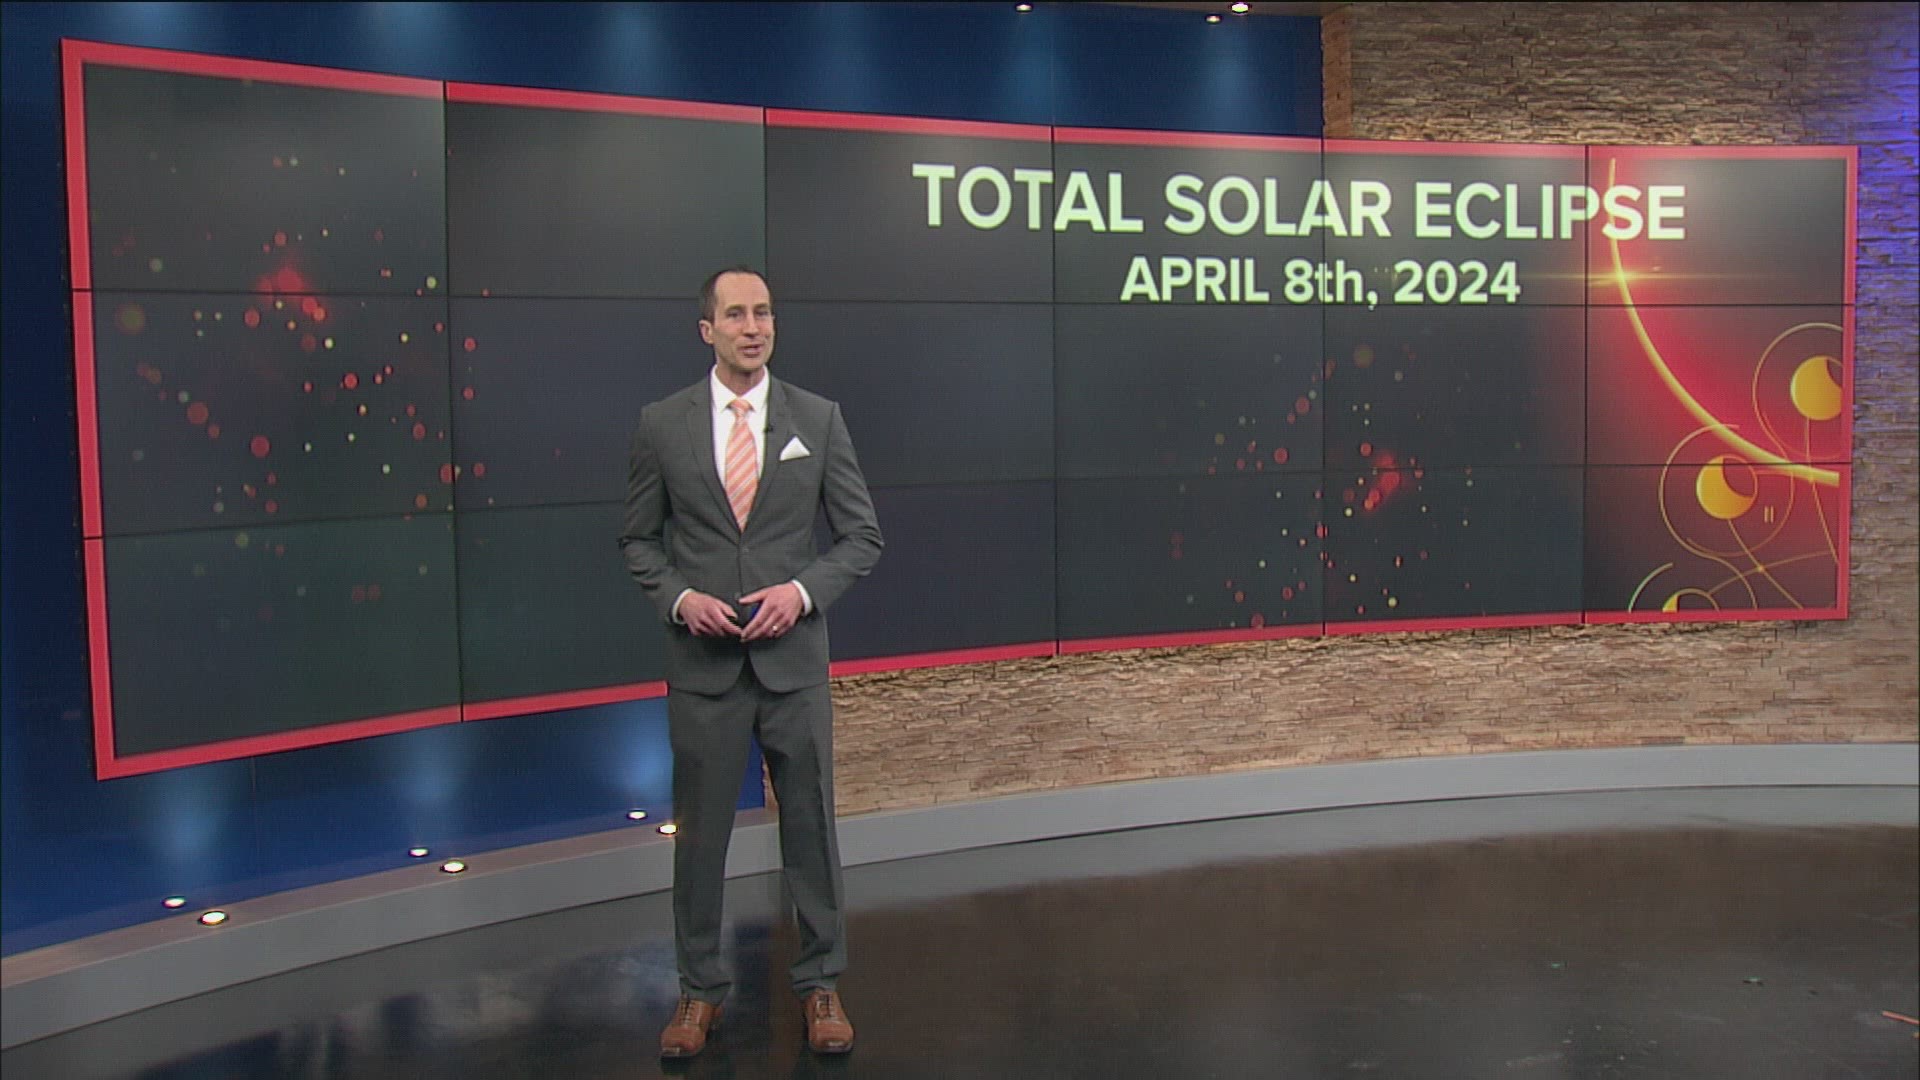 WTOL 11 Chief Meteorologist Chris Vickers breaks down the 3 things you need to know ahead of the event of the decade: the 2024 total solar eclipse.